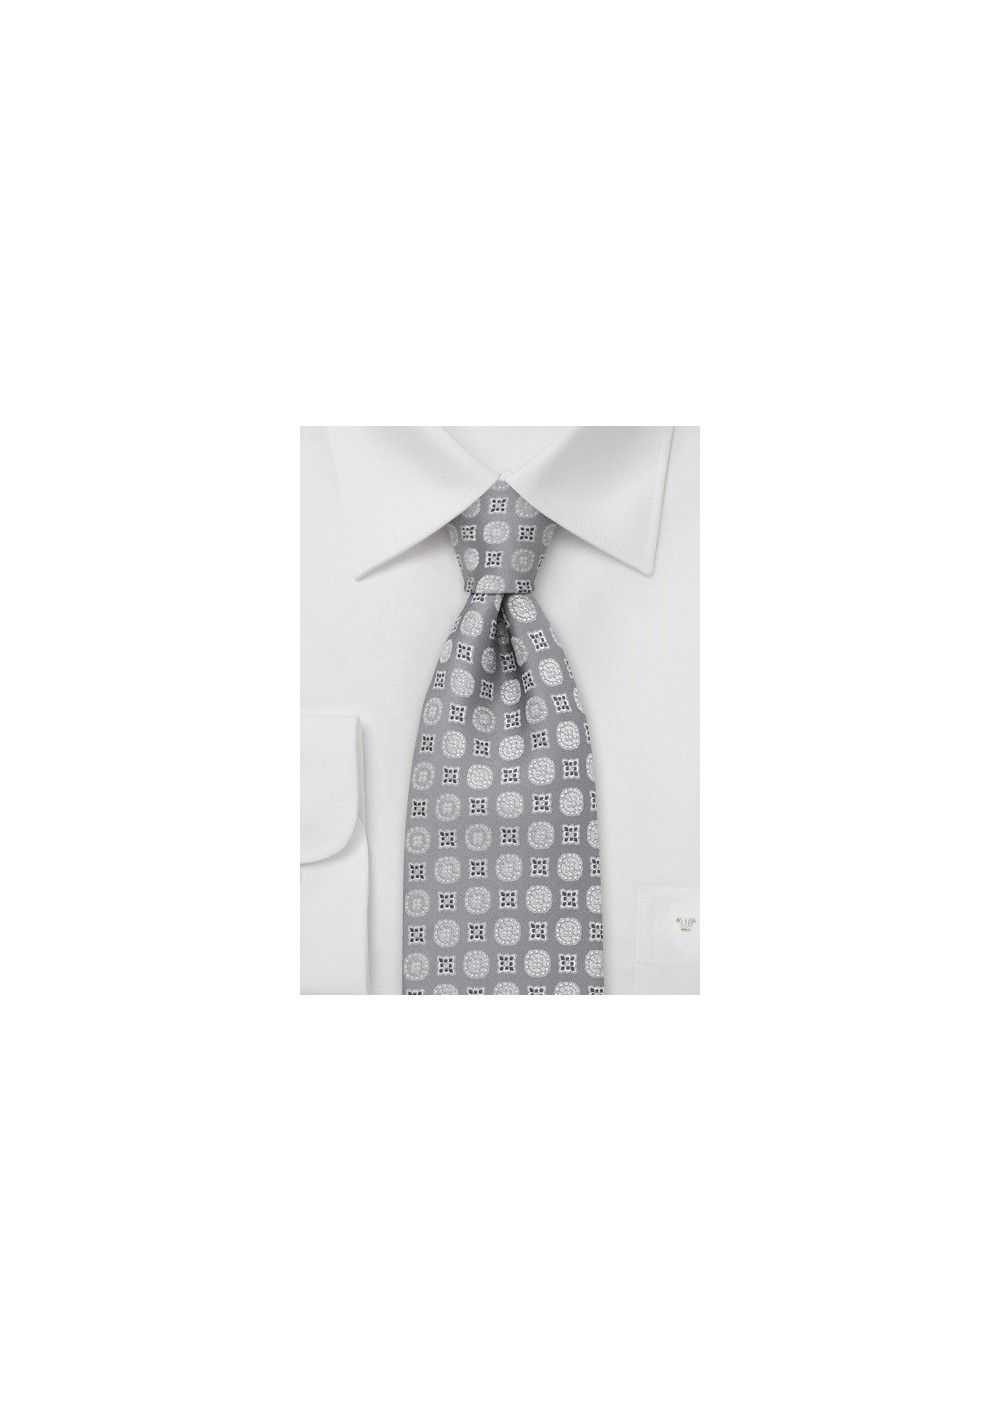 Silver-Gray Floral Tie by Chevalier